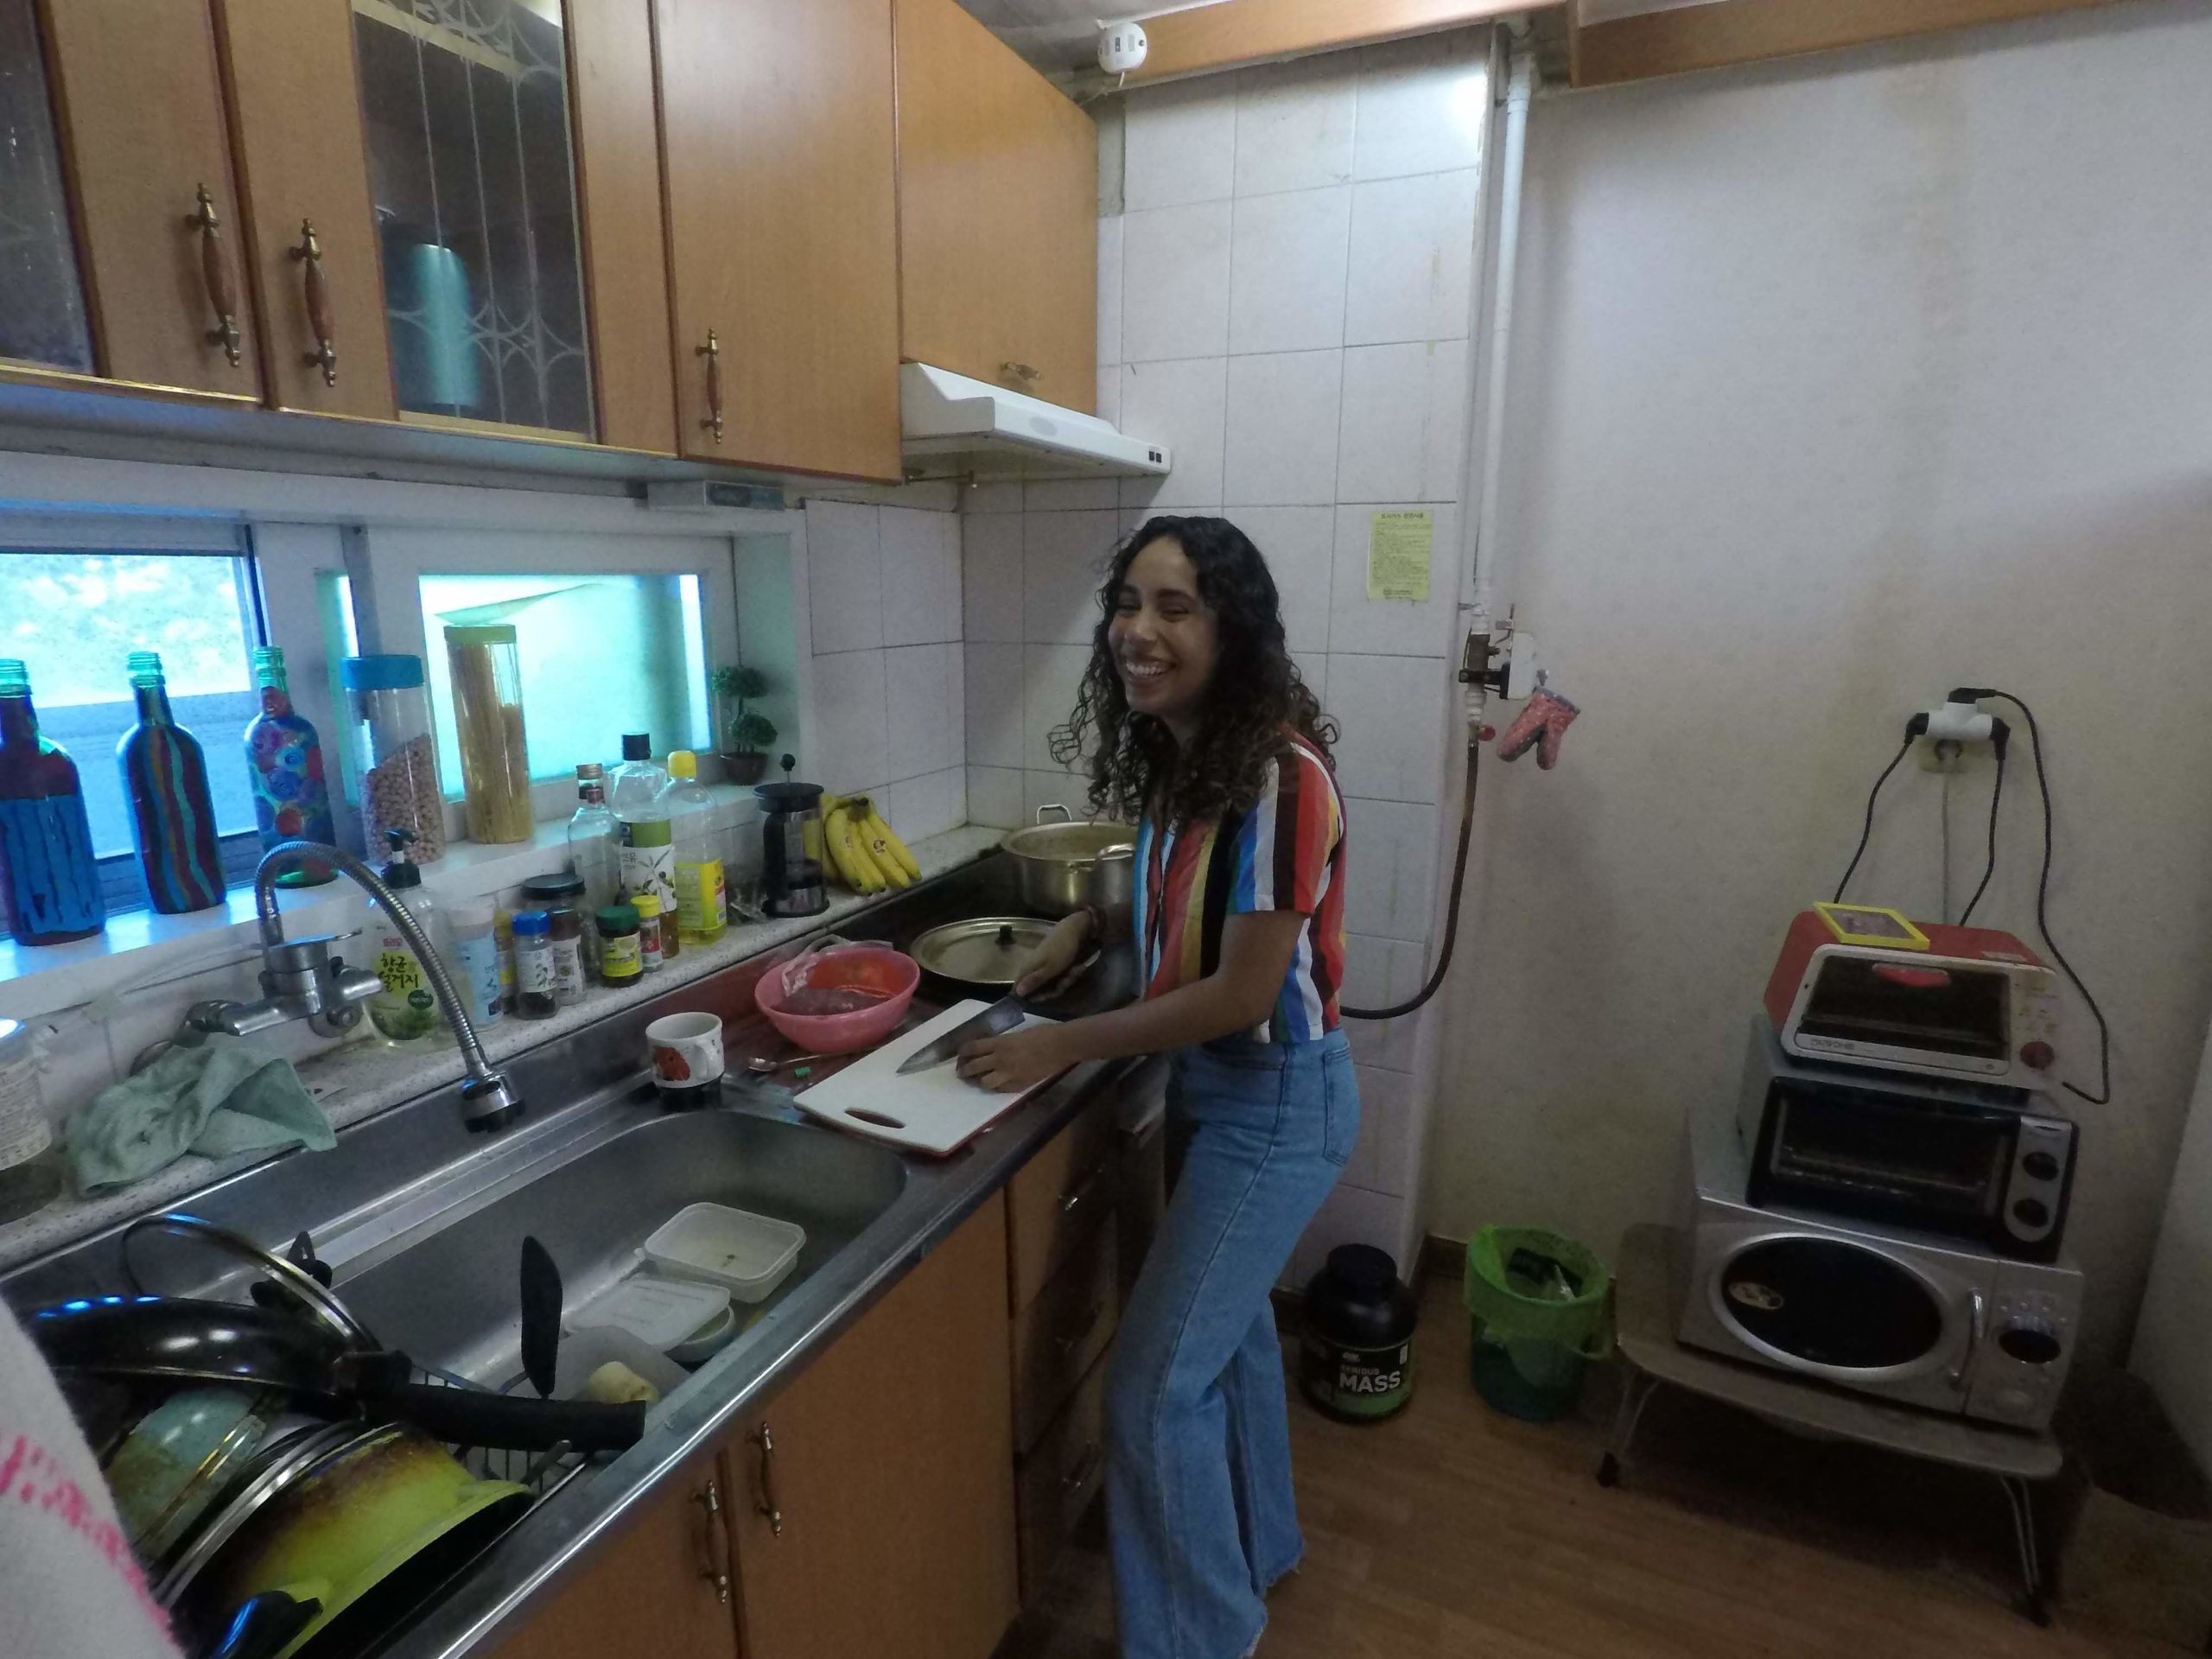 Natalie pictured at the center of the image in her first apartment in Imsil, South Korea.